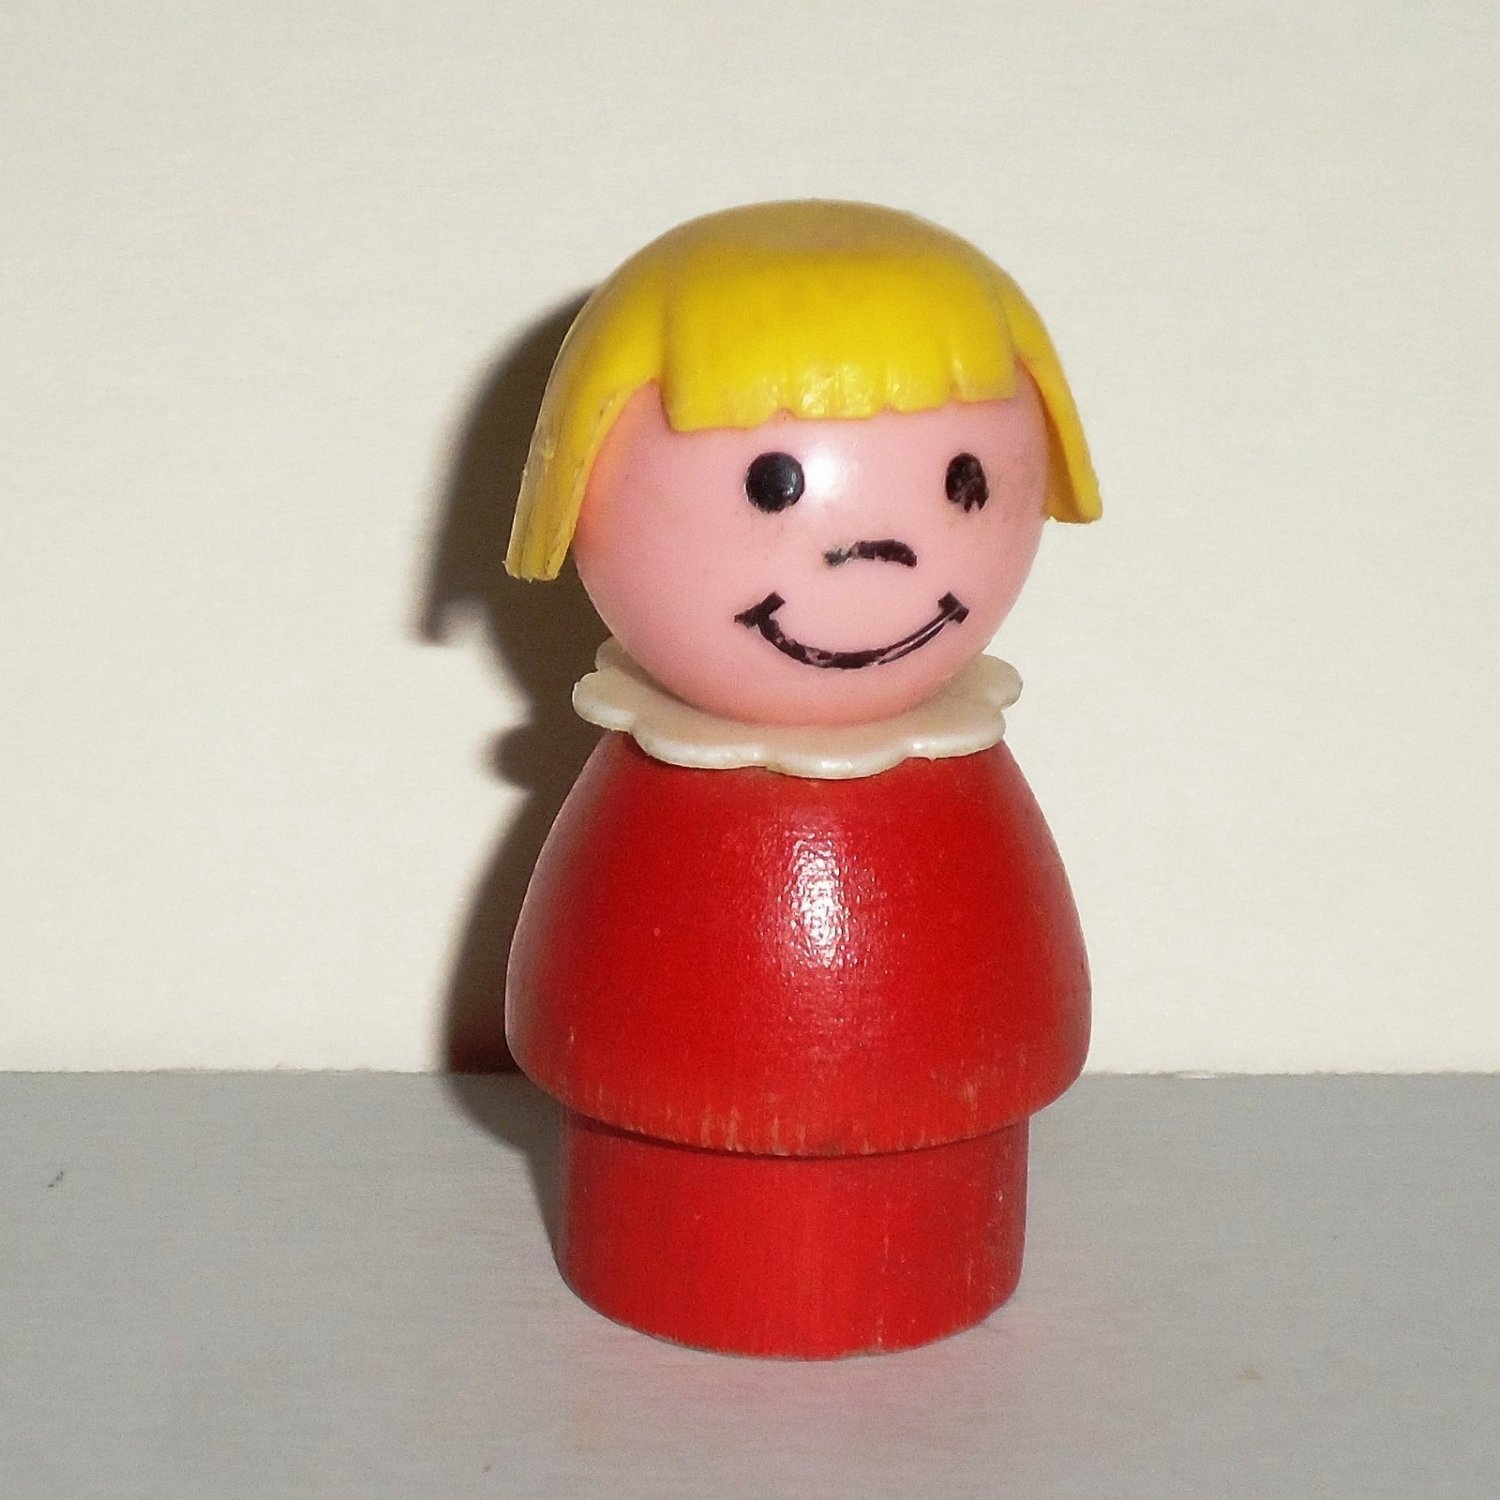 Details about   Vintage Fischer Price Little People Boy with Yellow Body and Red Hair 